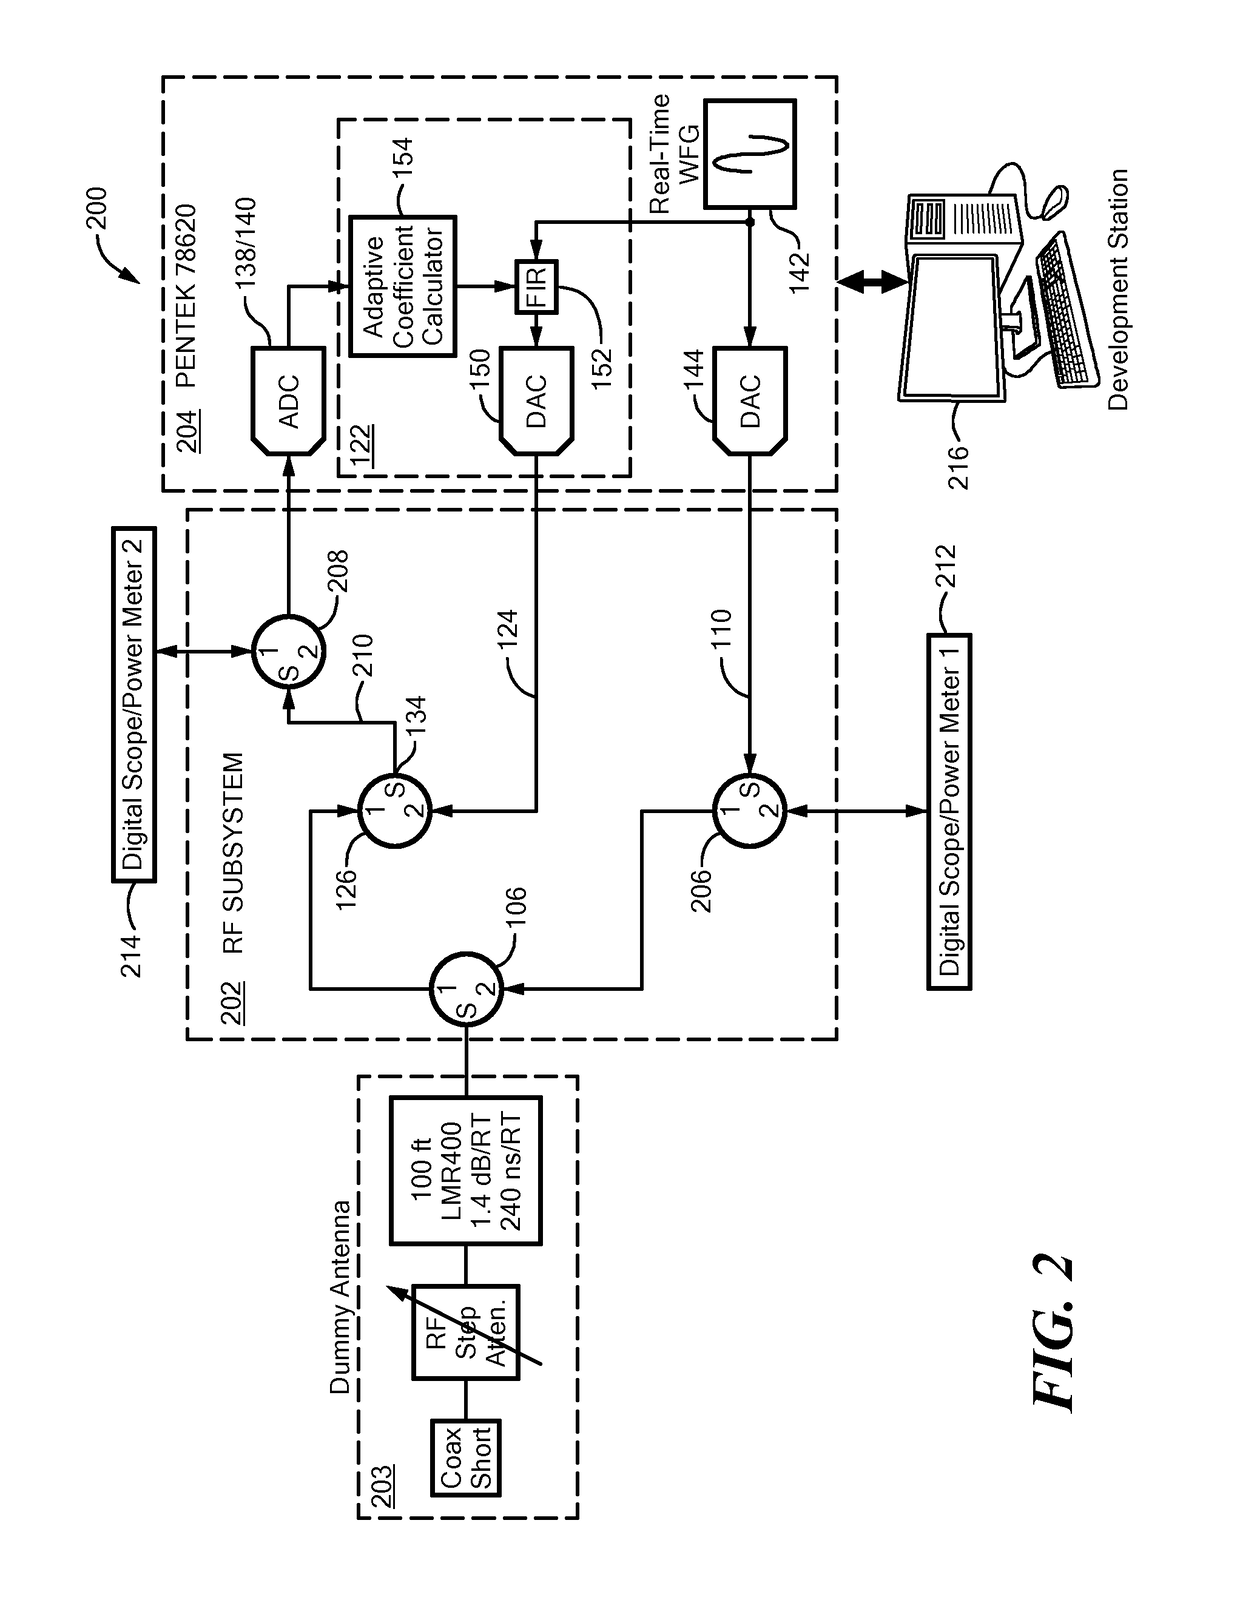 Digital simultaneous transmit and receive communication system